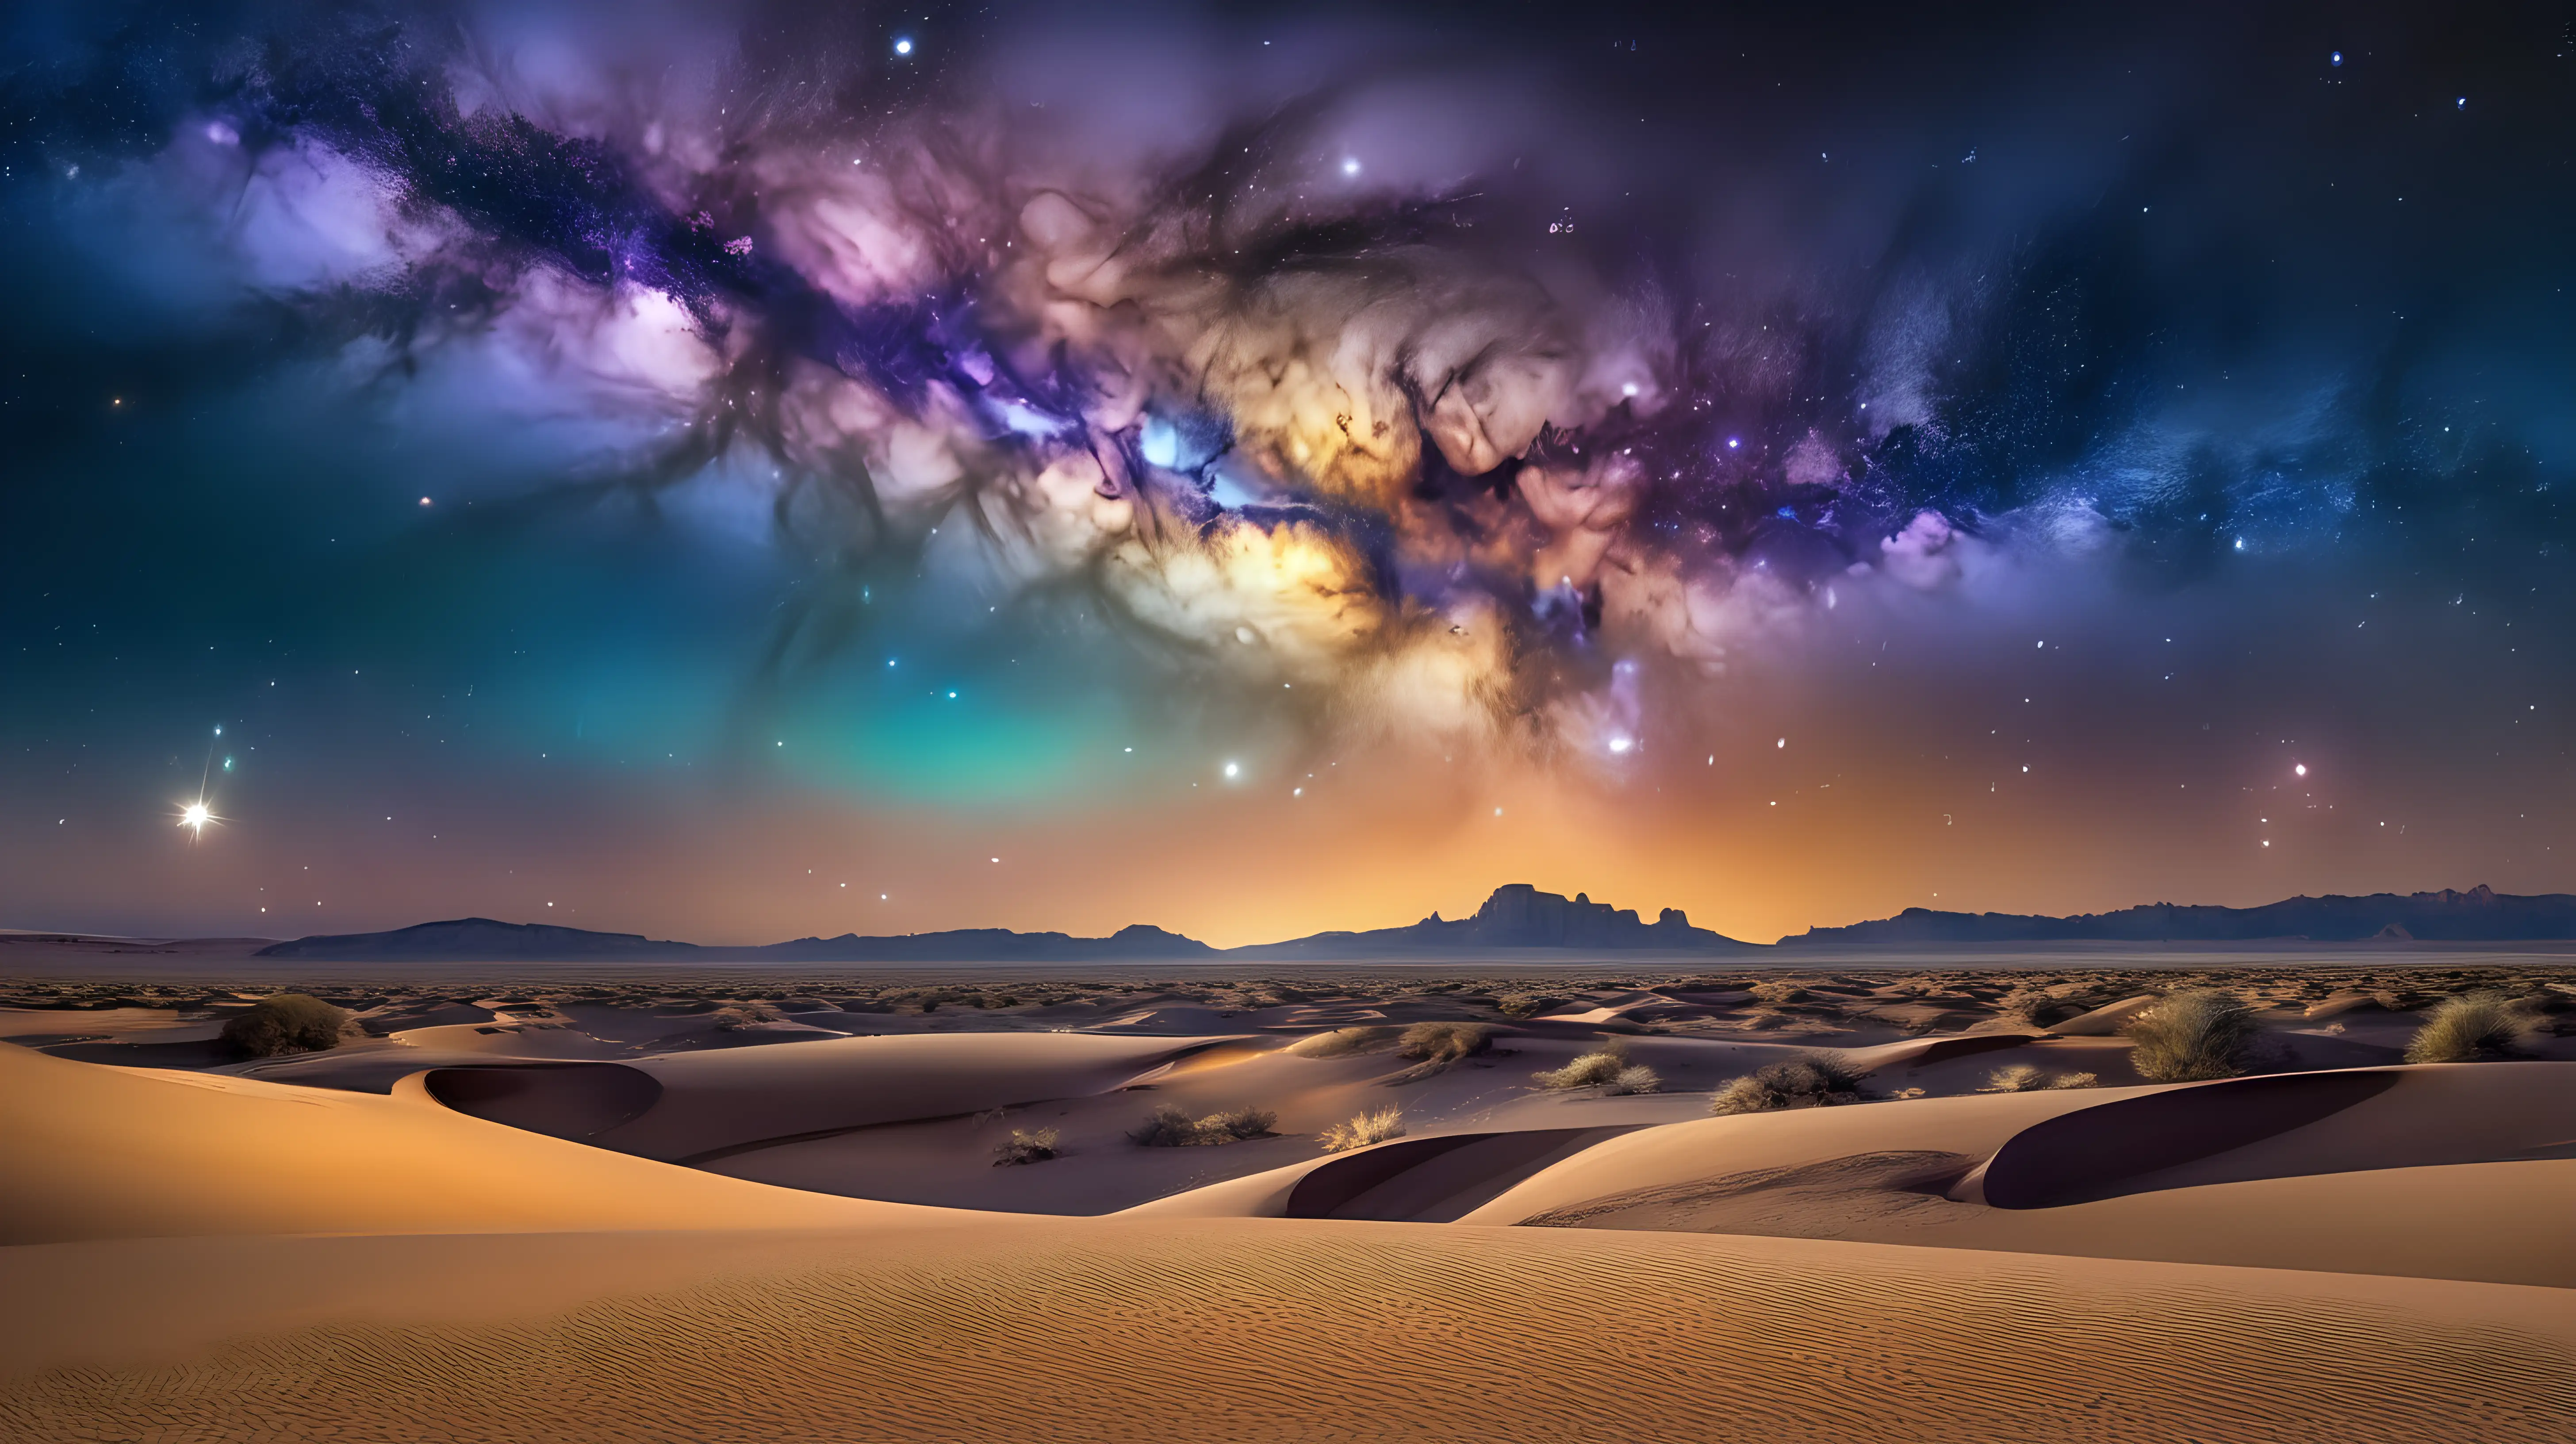 Mesmerizing Desert Sky Celestial Galaxies and Shimmering Stars Mirage